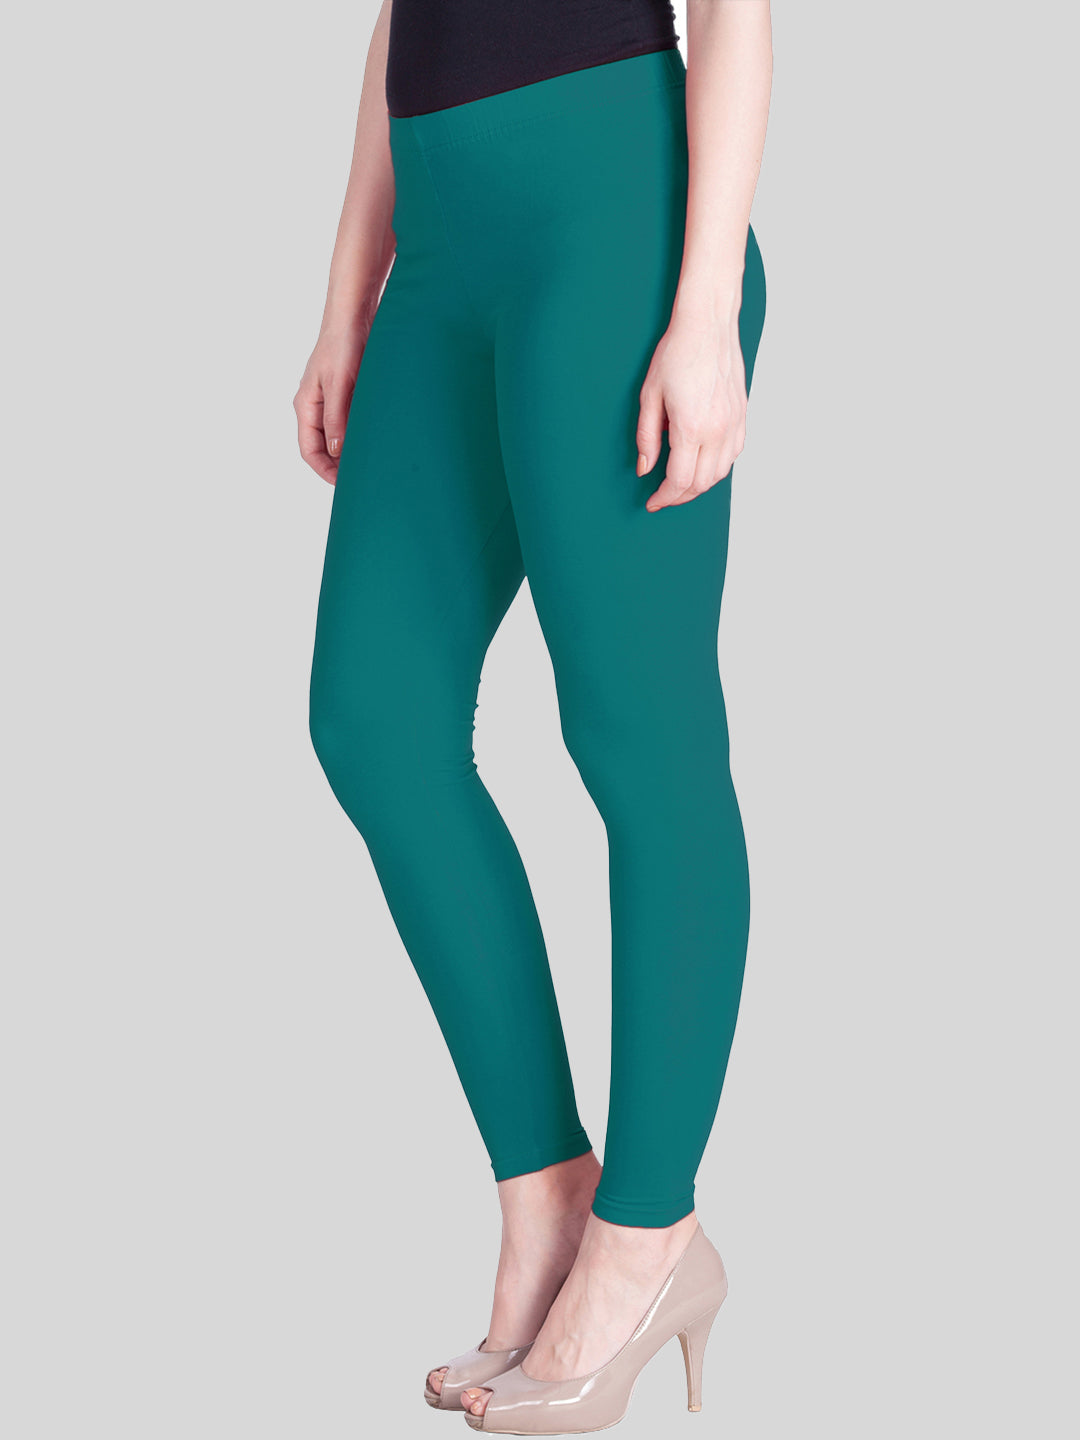 Buy CUVU Ankle Leggings for Women's - Size (XL) Colour (Anthra Melang) at